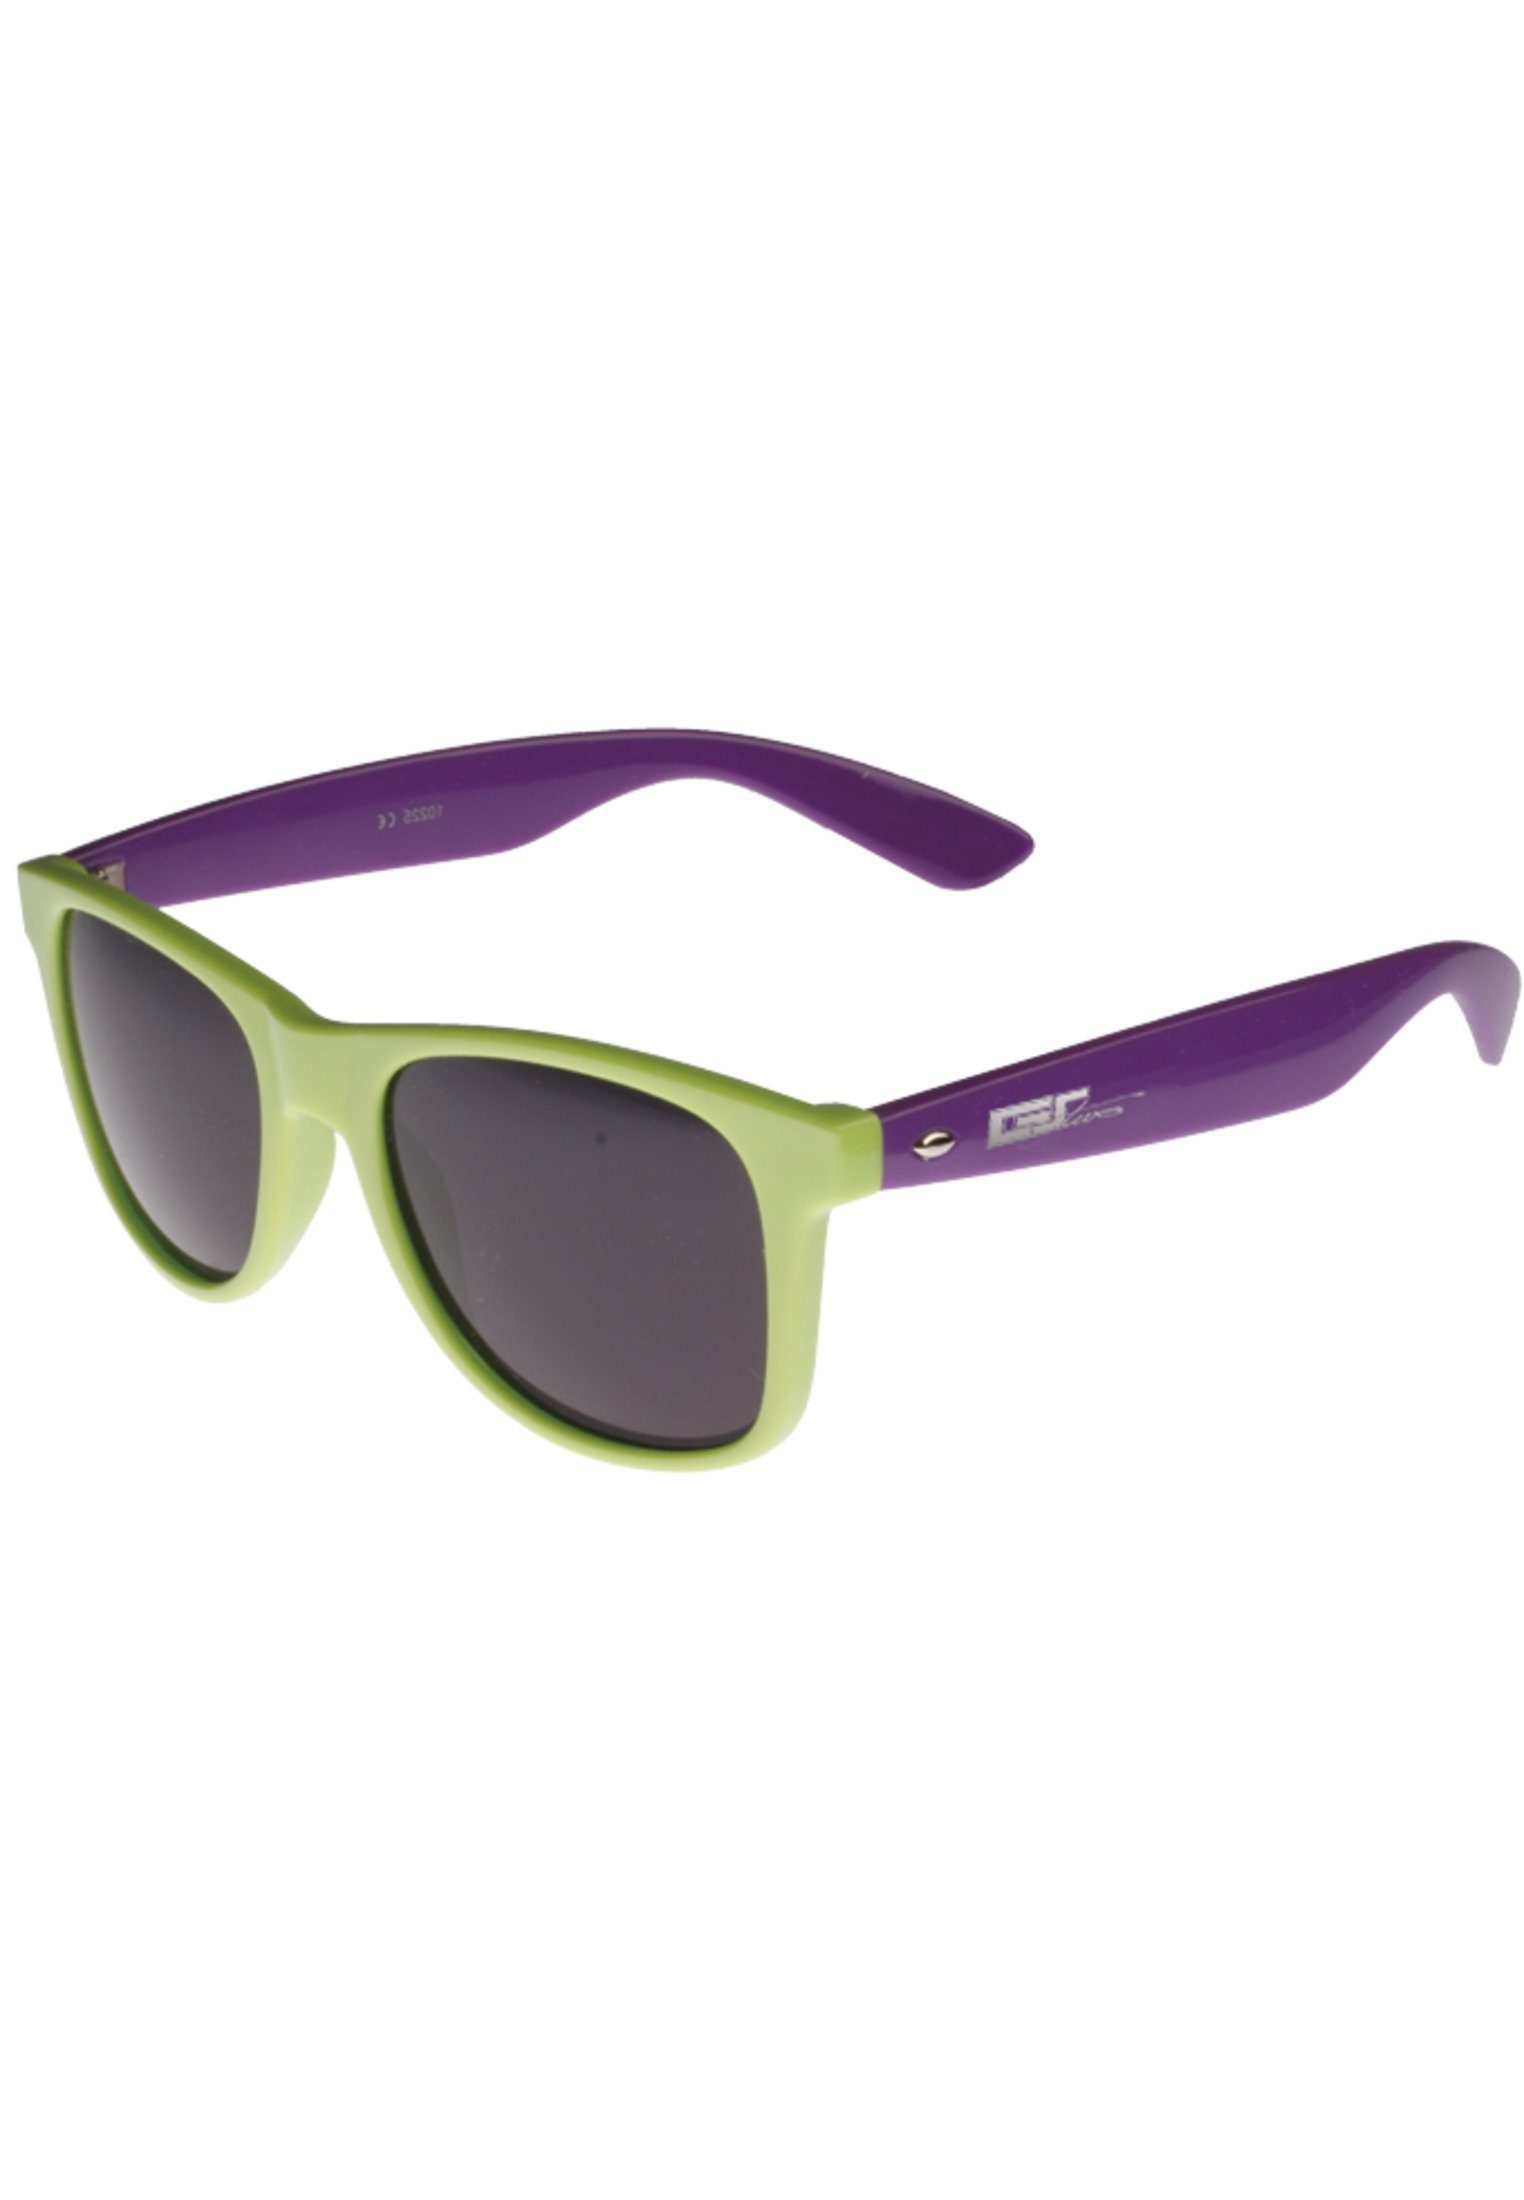 Shades Sonnenbrille GStwo Accessoires MSTRDS Groove limegreen/purple